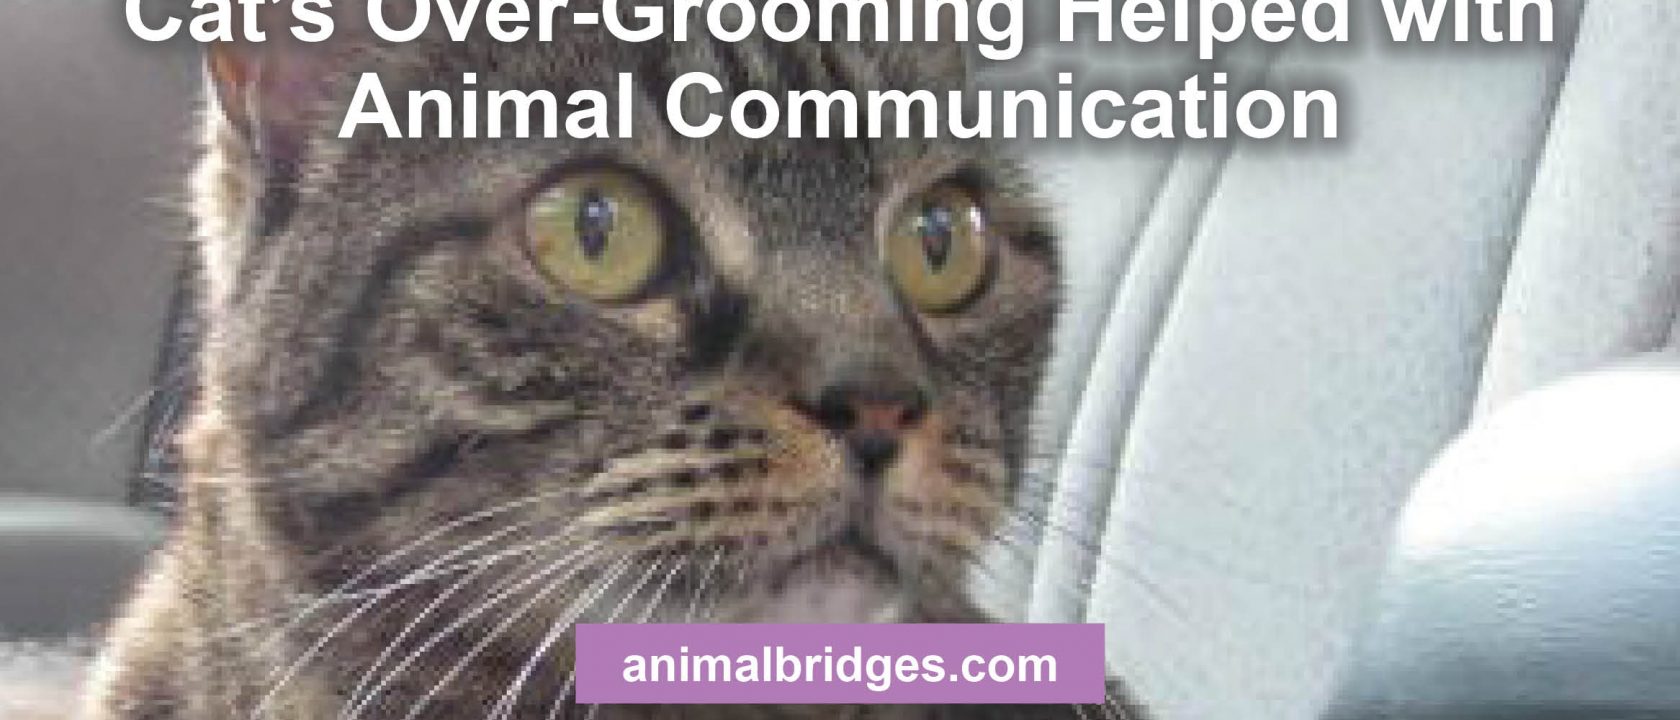 Cat over-grooming helped with animal communication